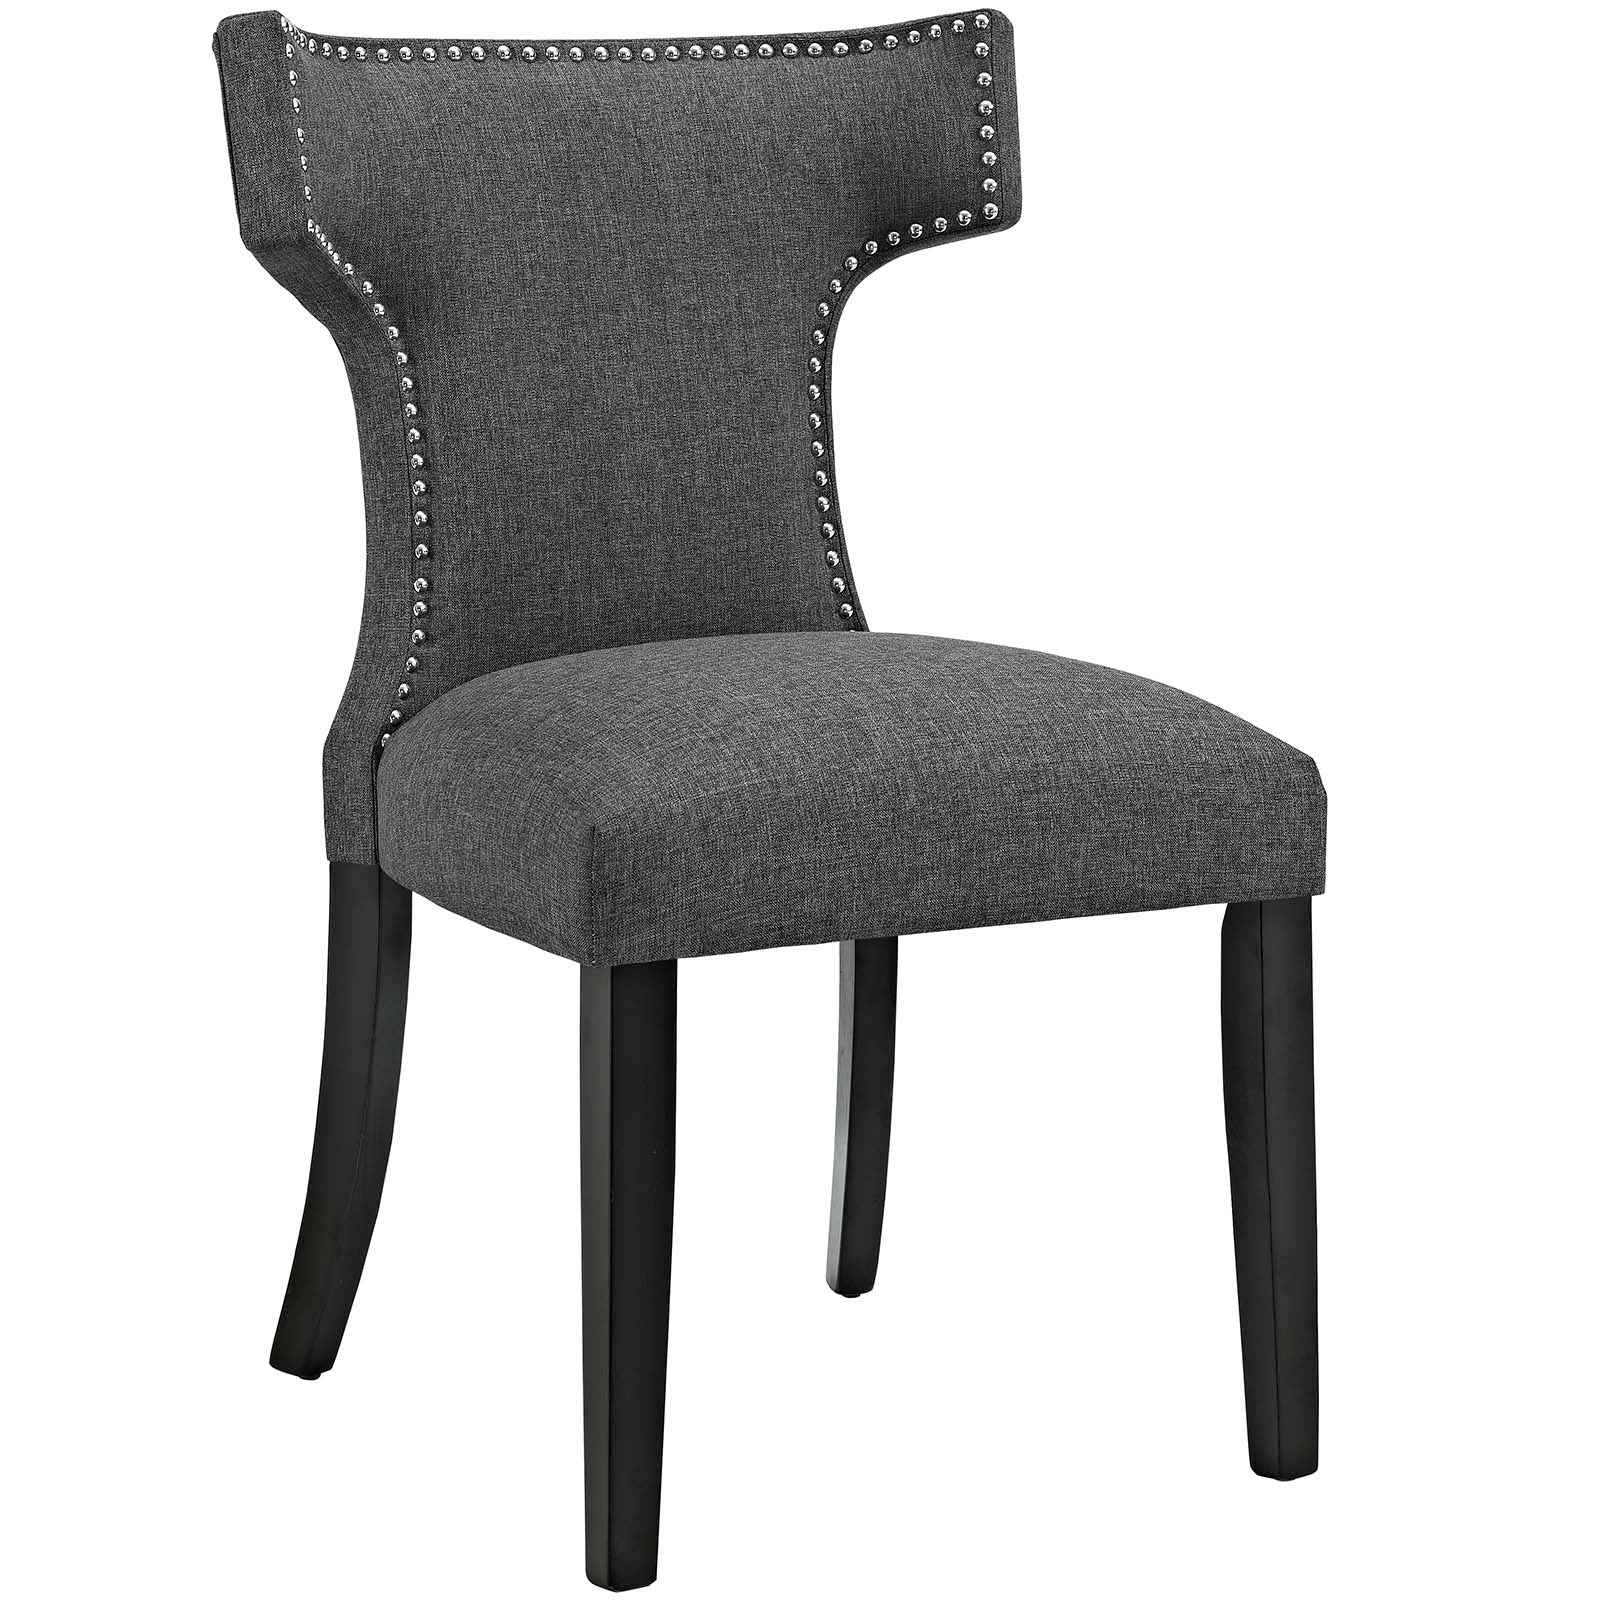 Curve Dining Side Chair Fabric Set of 2 - East Shore Modern Home Furnishings